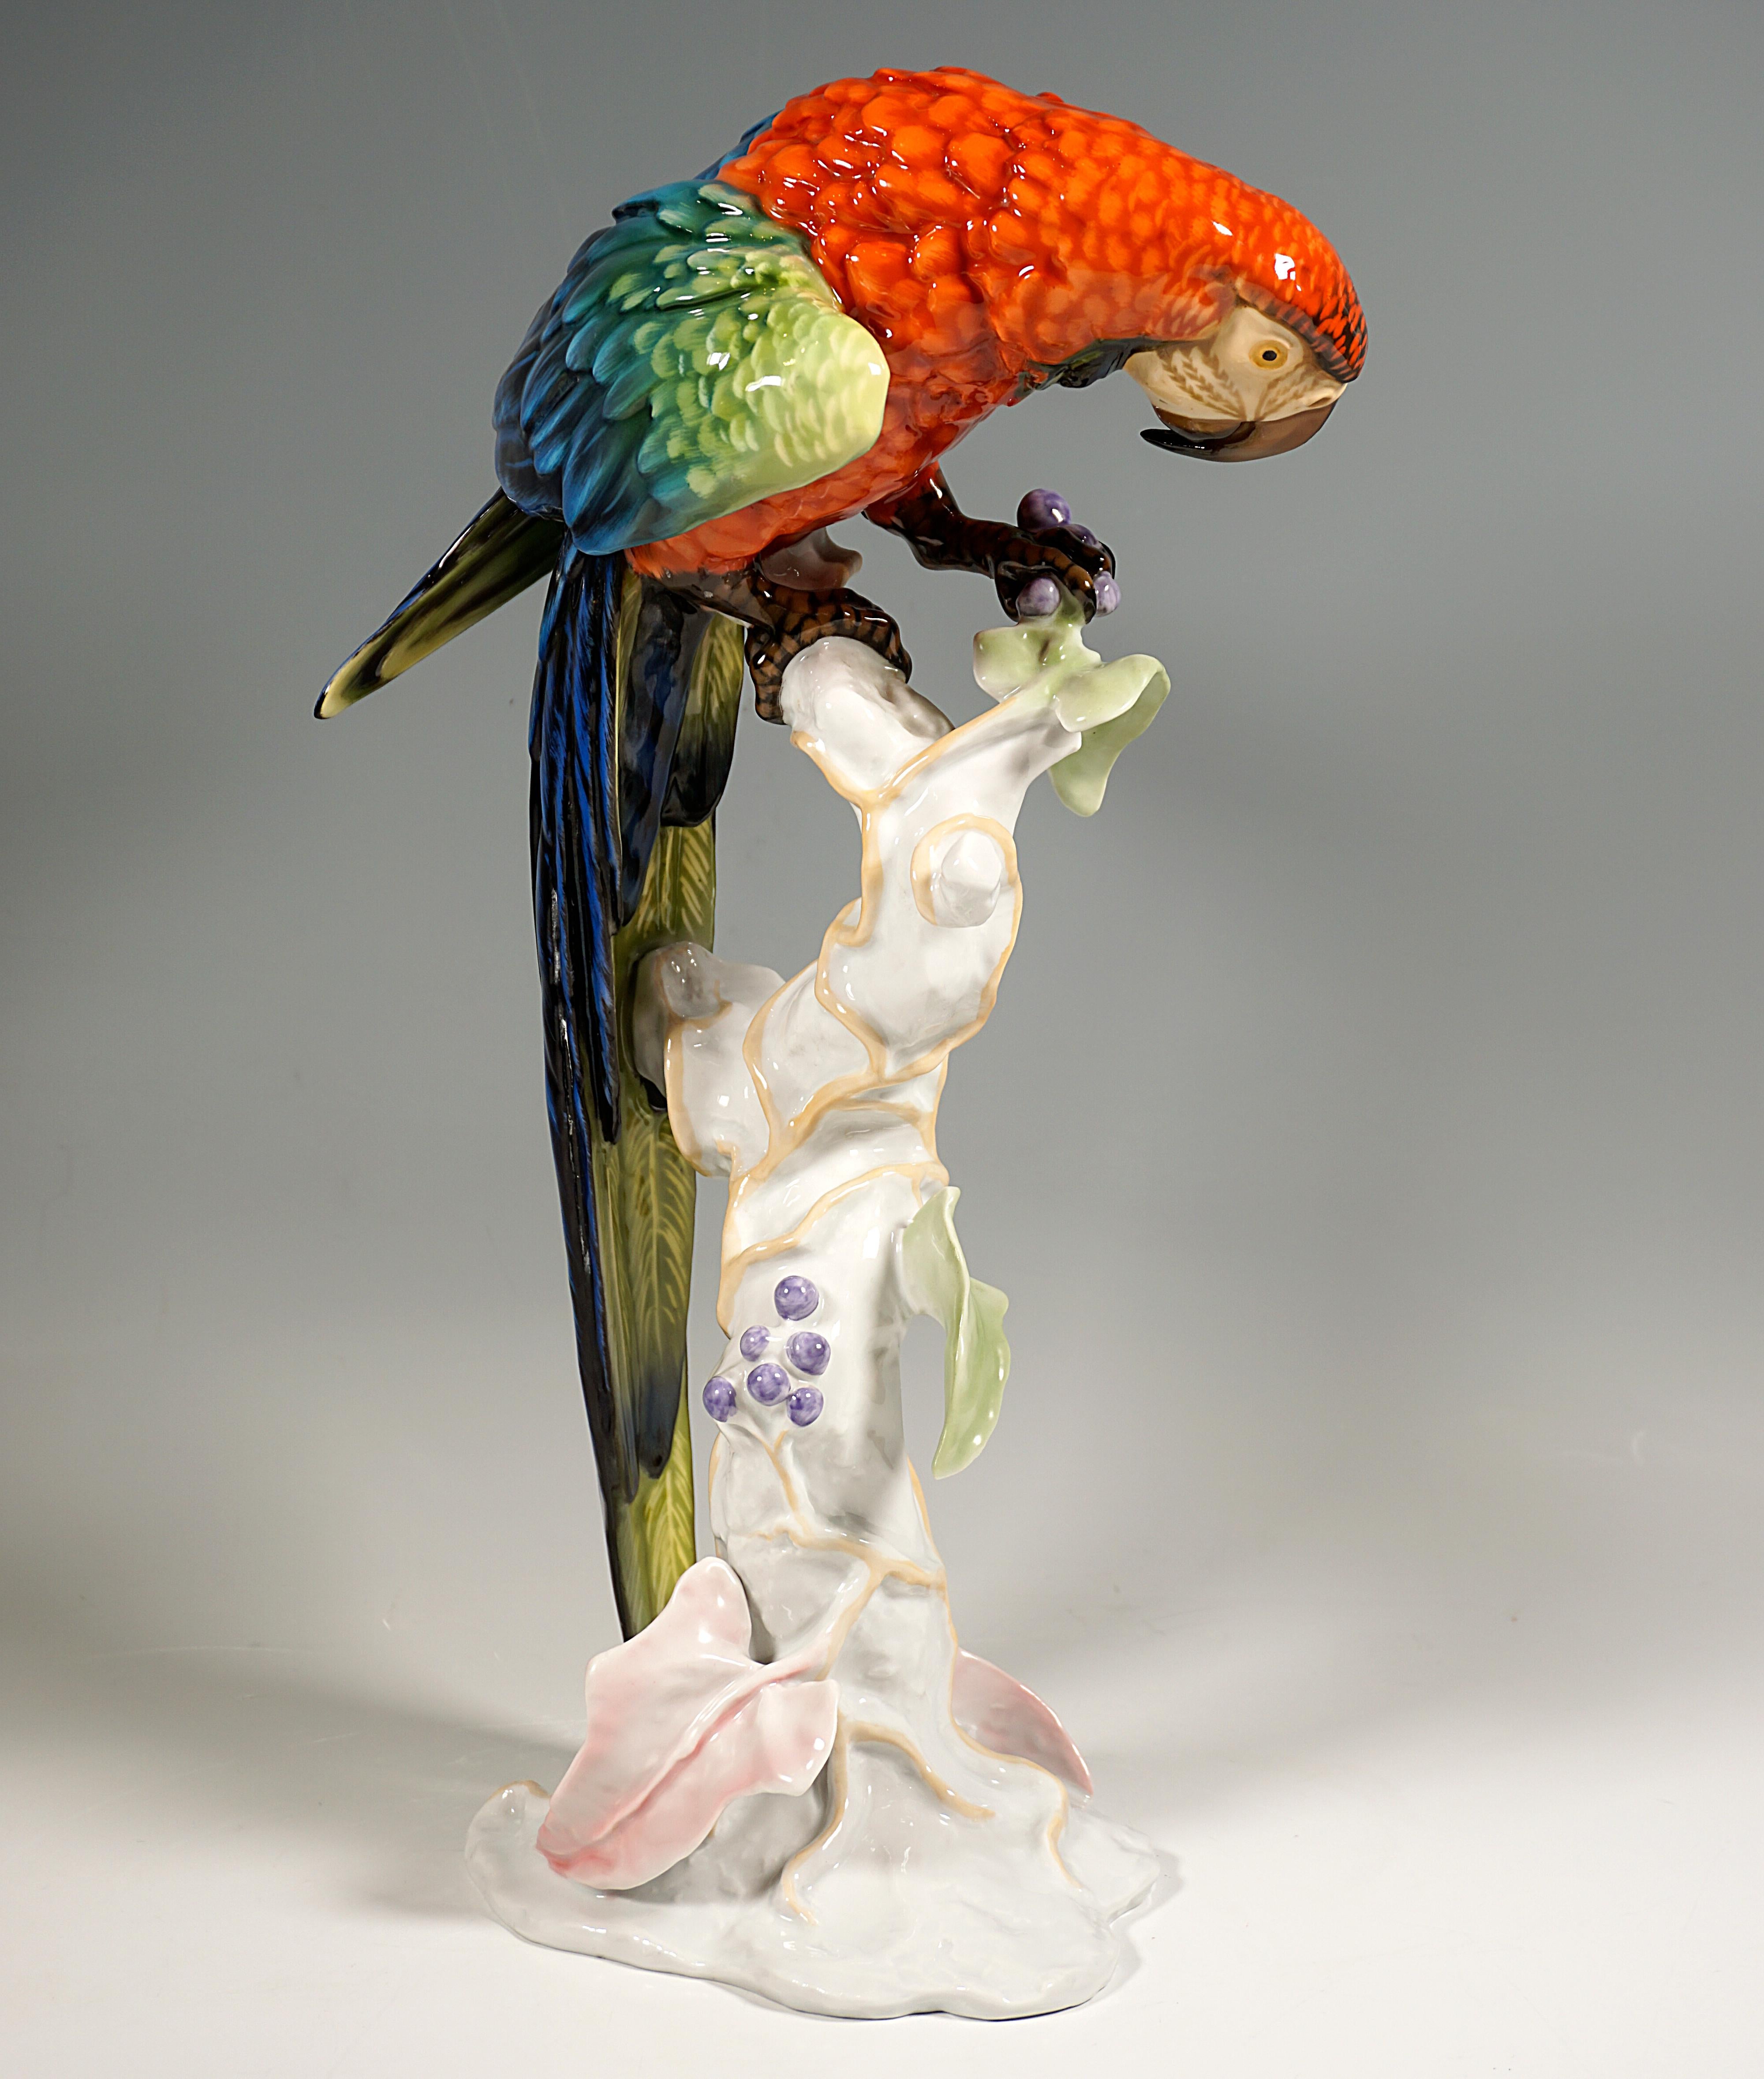 Art Nouveau Large Porcelain Animal Figure, Macaw on a Trunk, Rosenthal Germany, Mid-20th